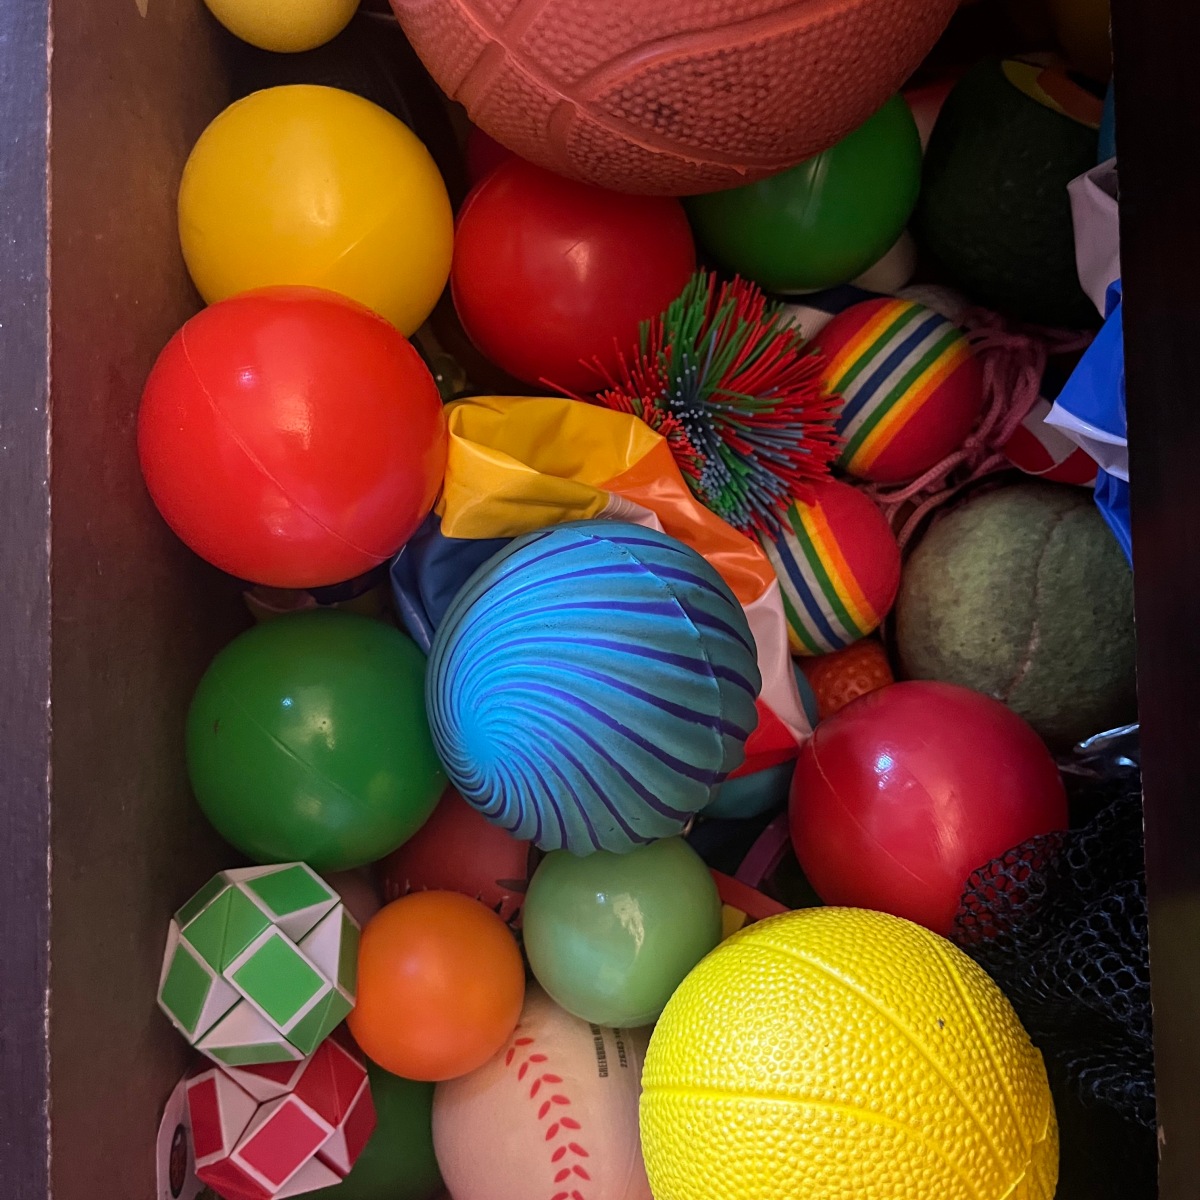 Spizzy blue ball inside drawer filled with other balls